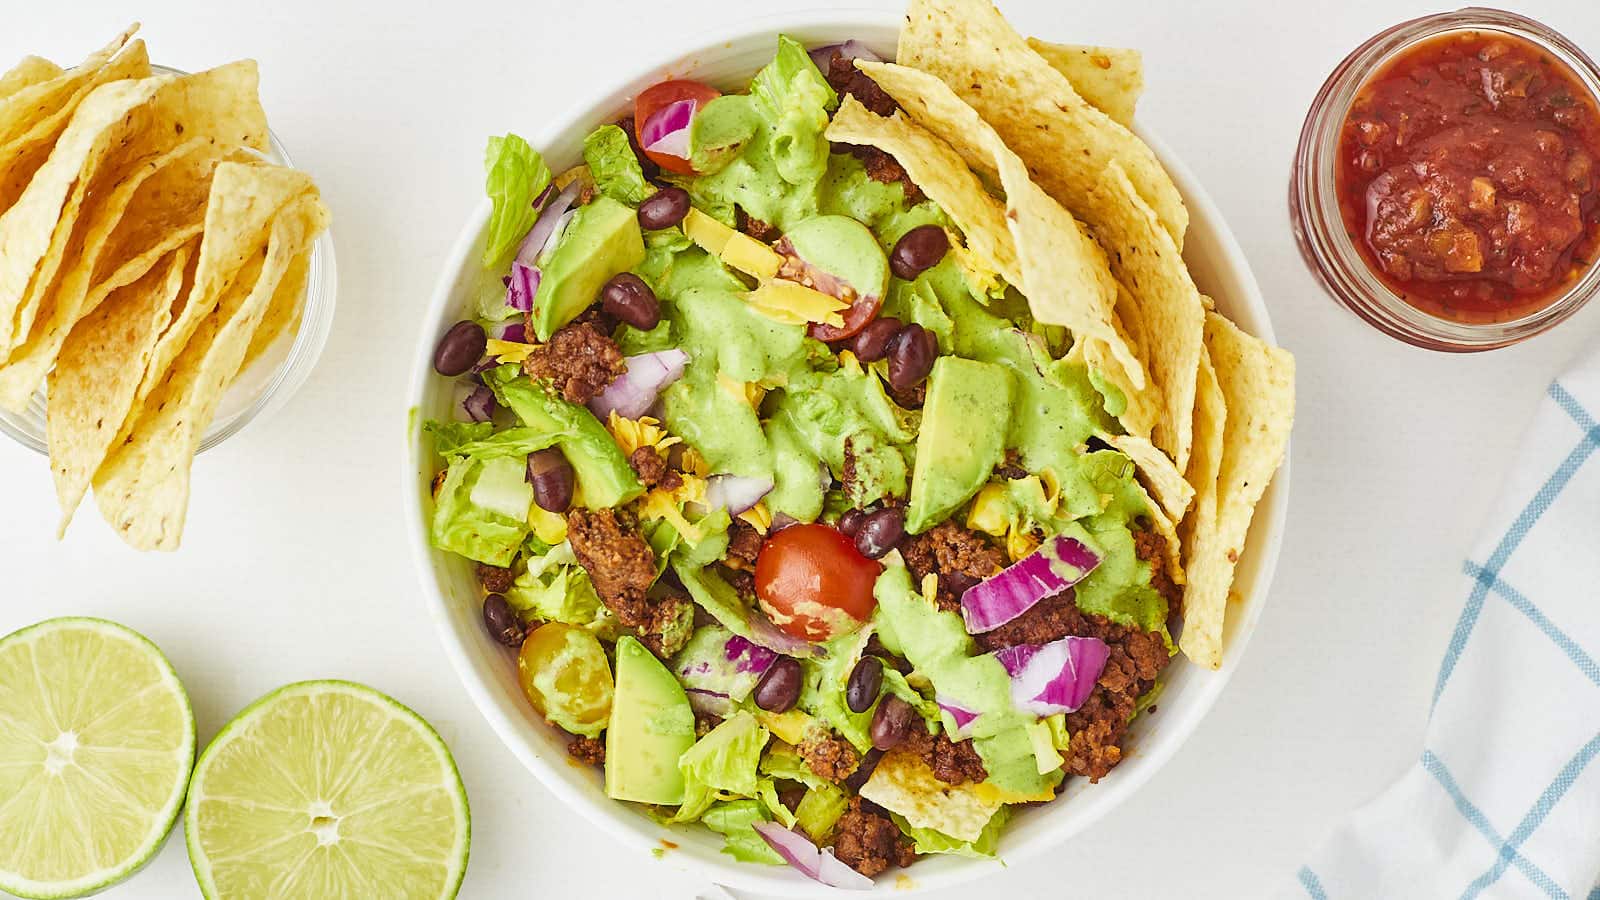 Taco Salad recipes by Cheerful Cook.